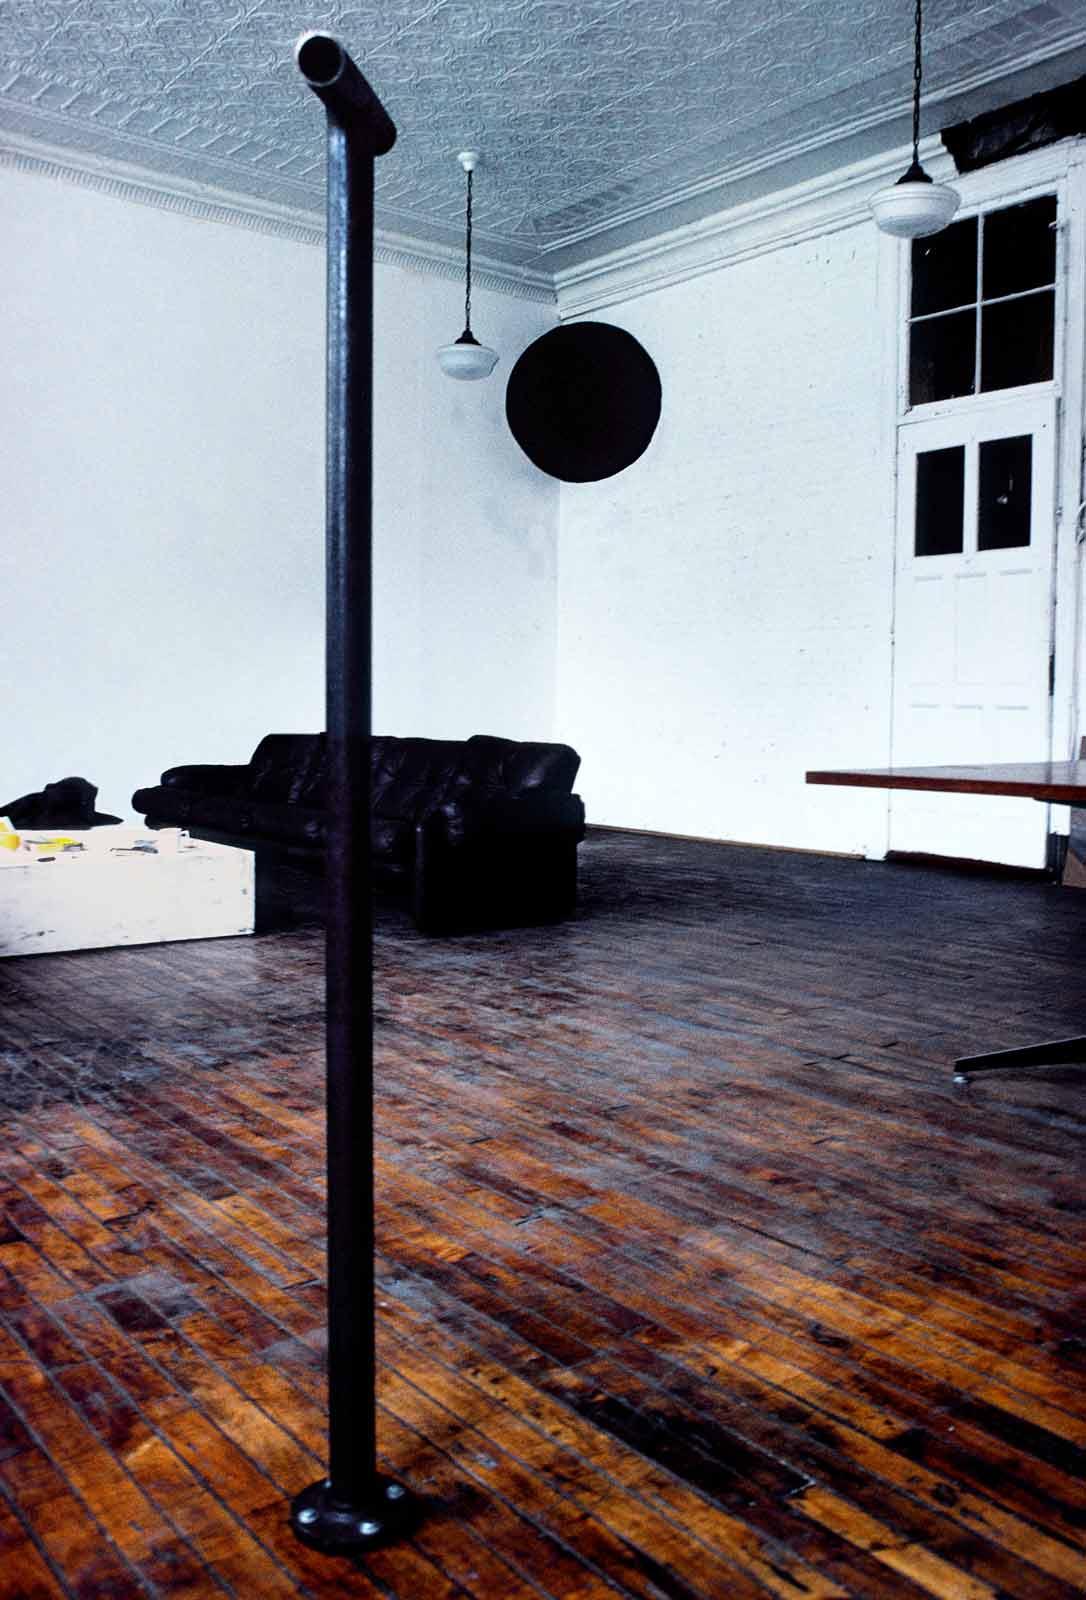 Stell pipe in a room with wood floors, white walls, and a black circle painted in the corner of the room.